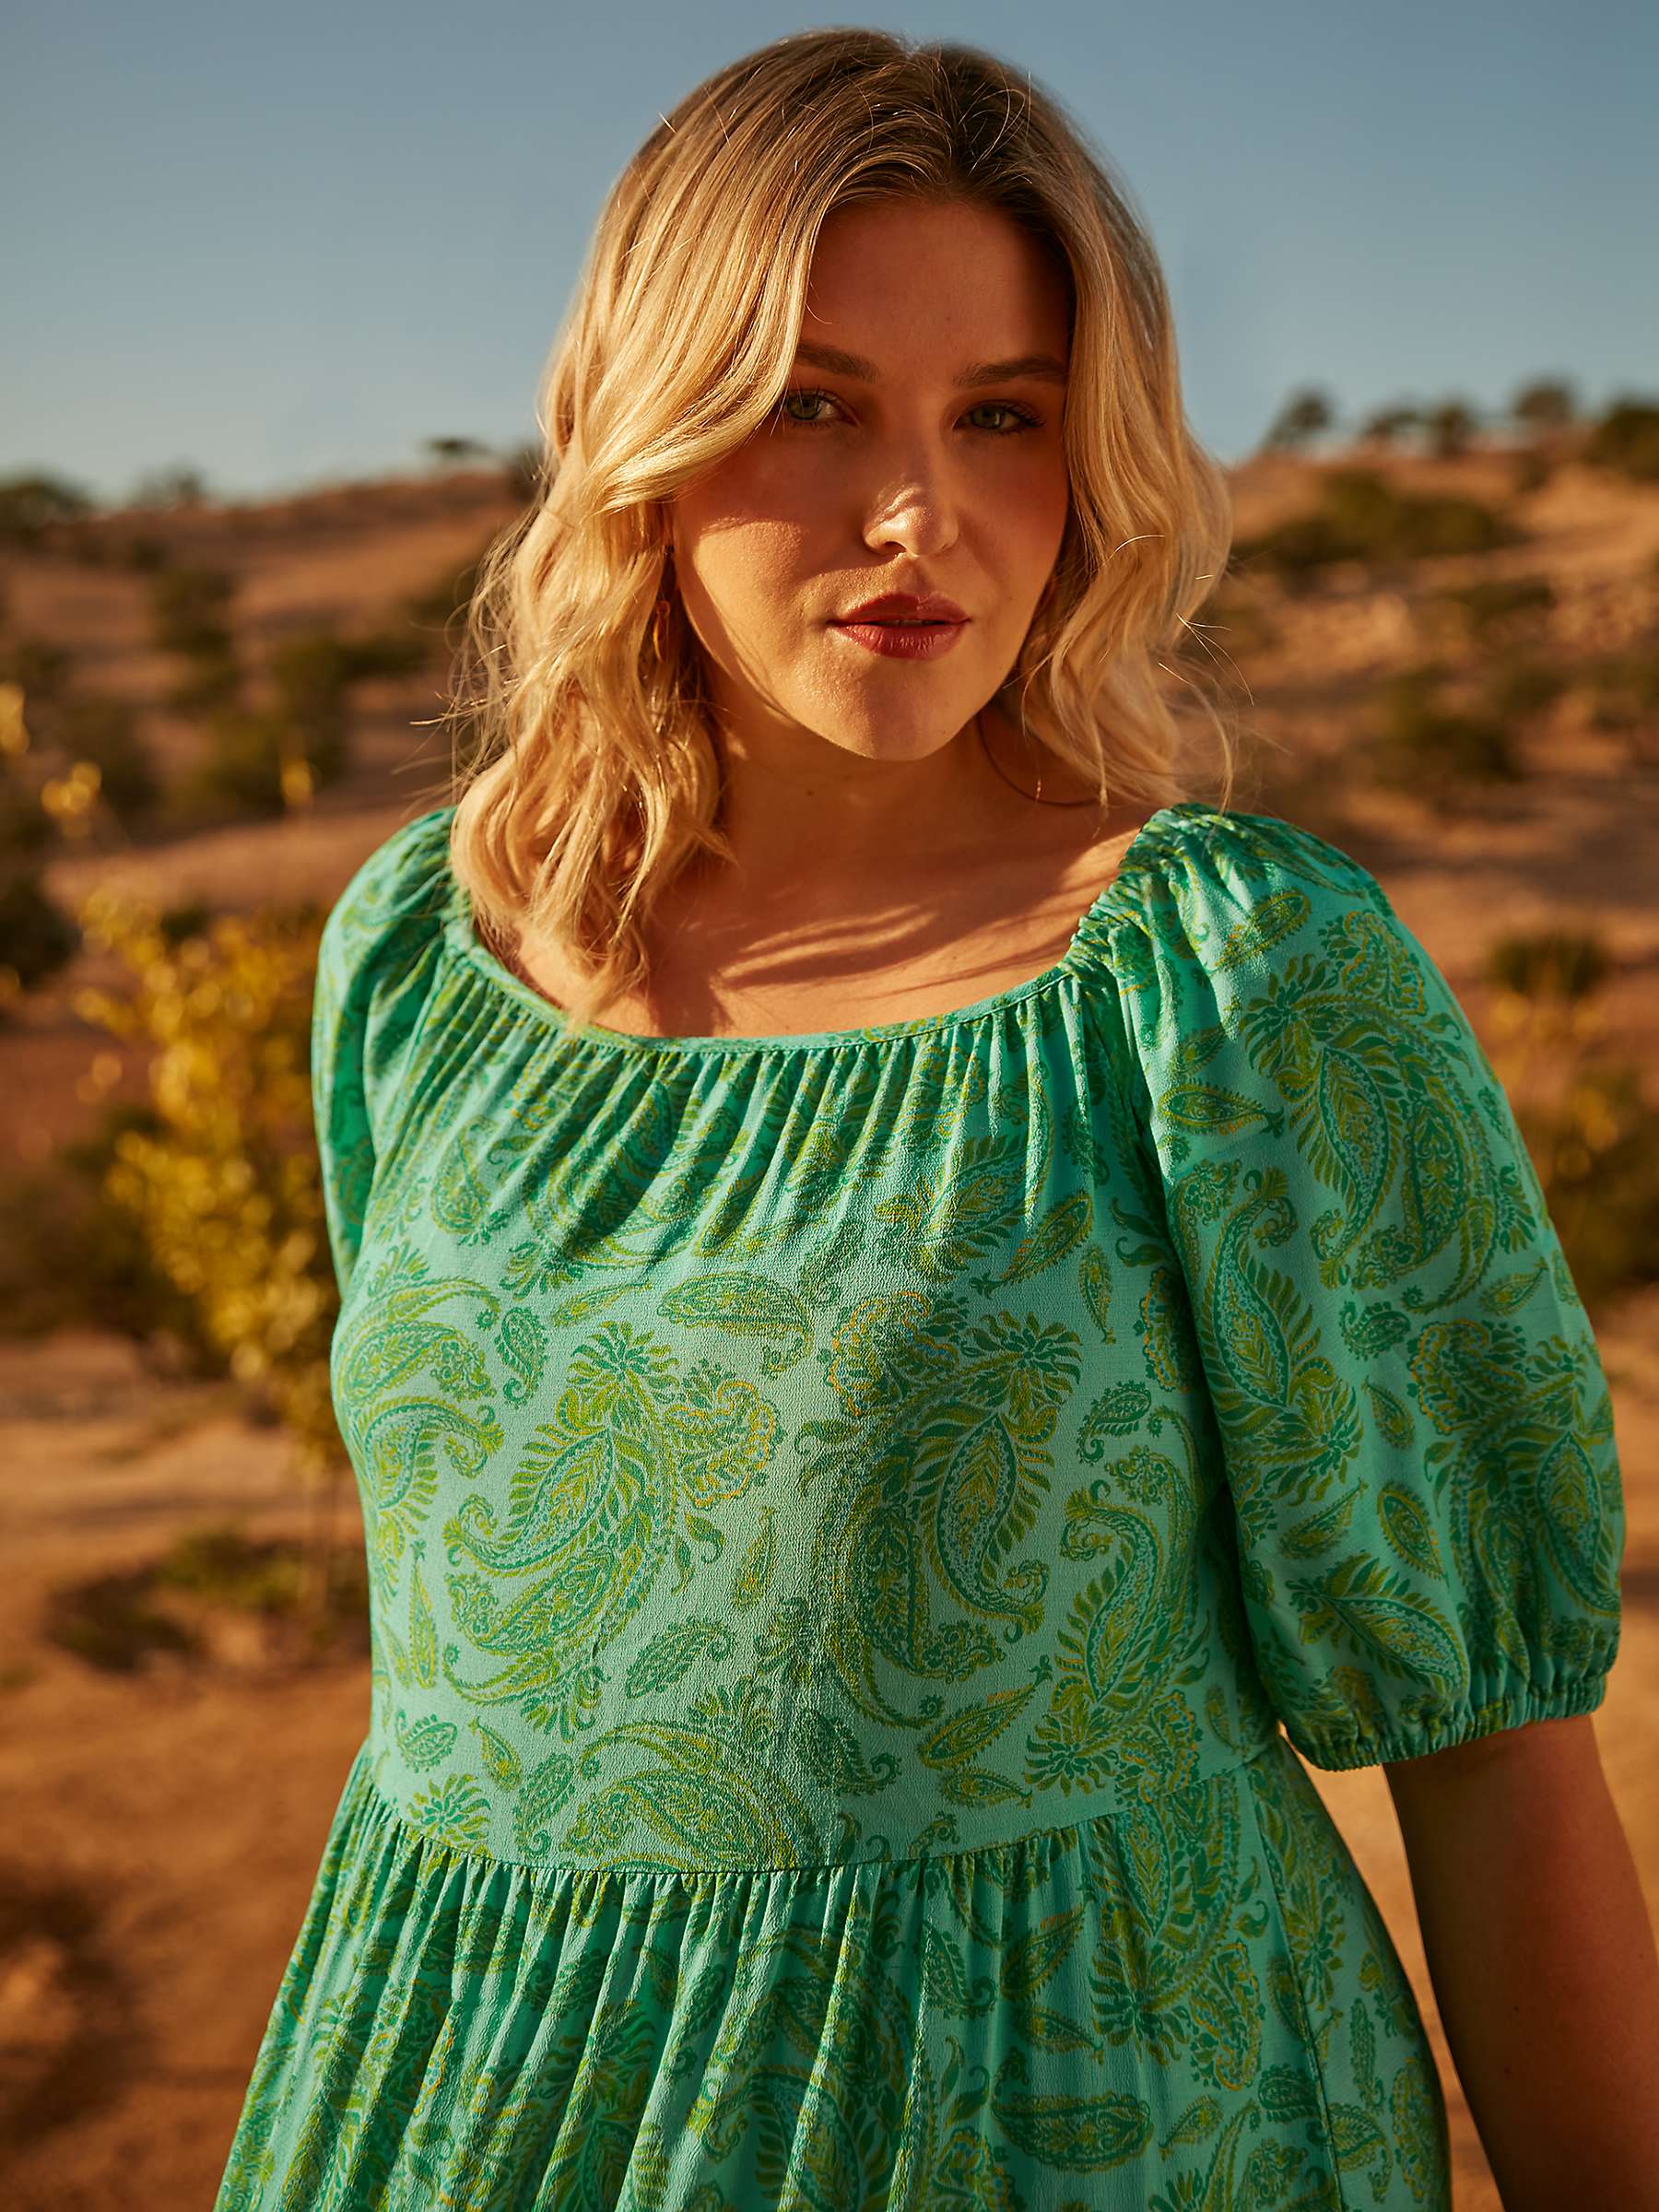 Buy Live Unlimited Curve Paisley Puff Sleeve Midi Dress, Green/Multi Online at johnlewis.com